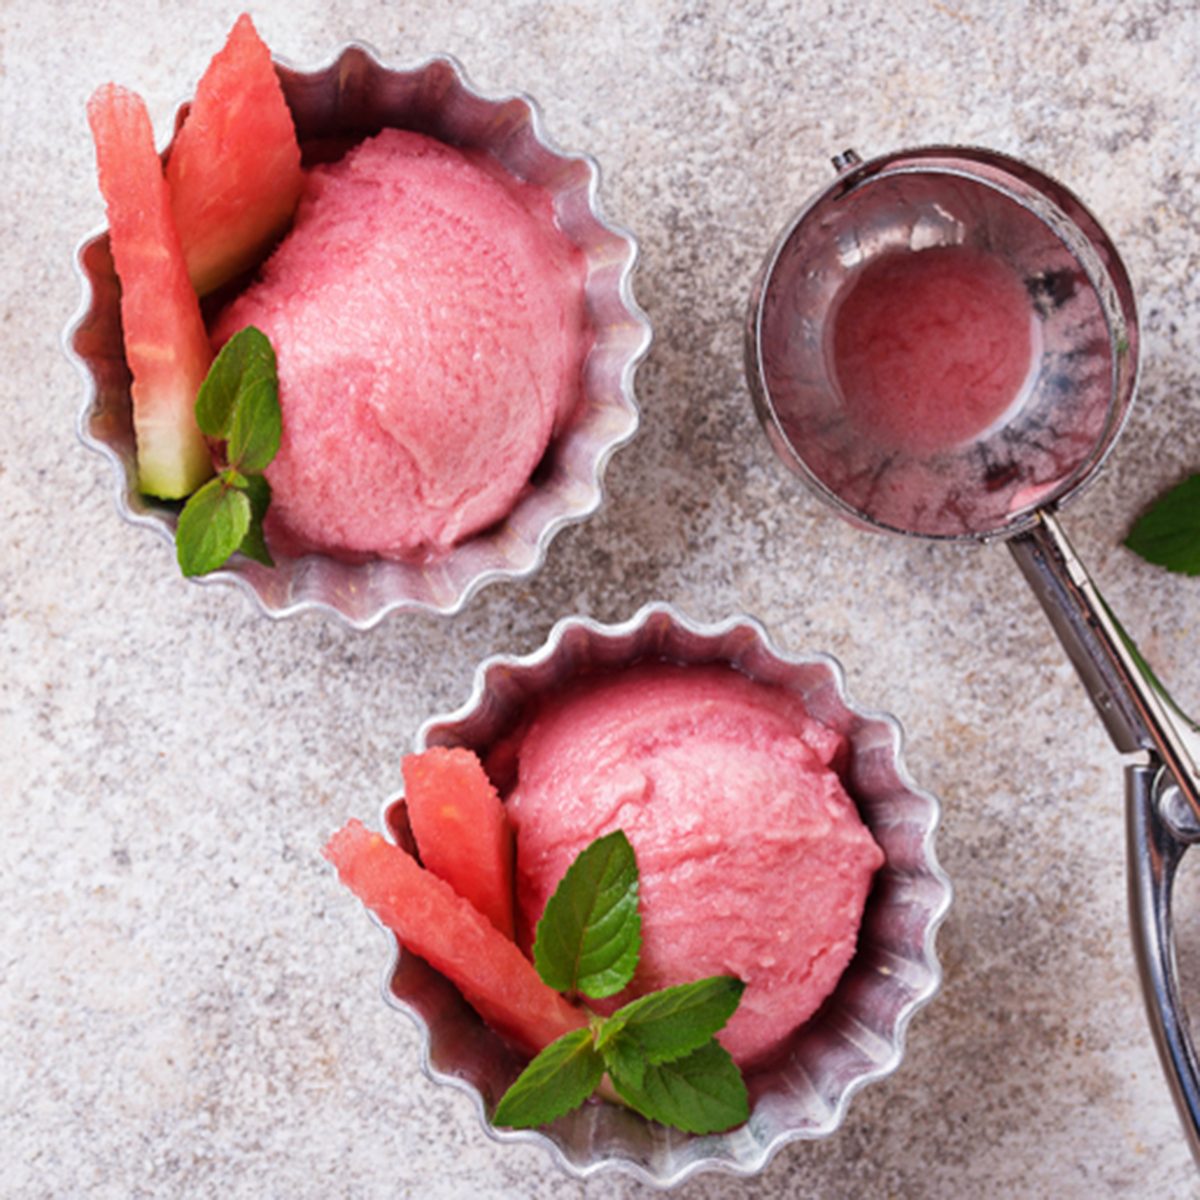 Watermelon ice cream in metal bowls on light background. Top view; Shutterstock ID 1144557173; Job (TFH, TOH, RD, BNB, CWM, CM): Taste of Home